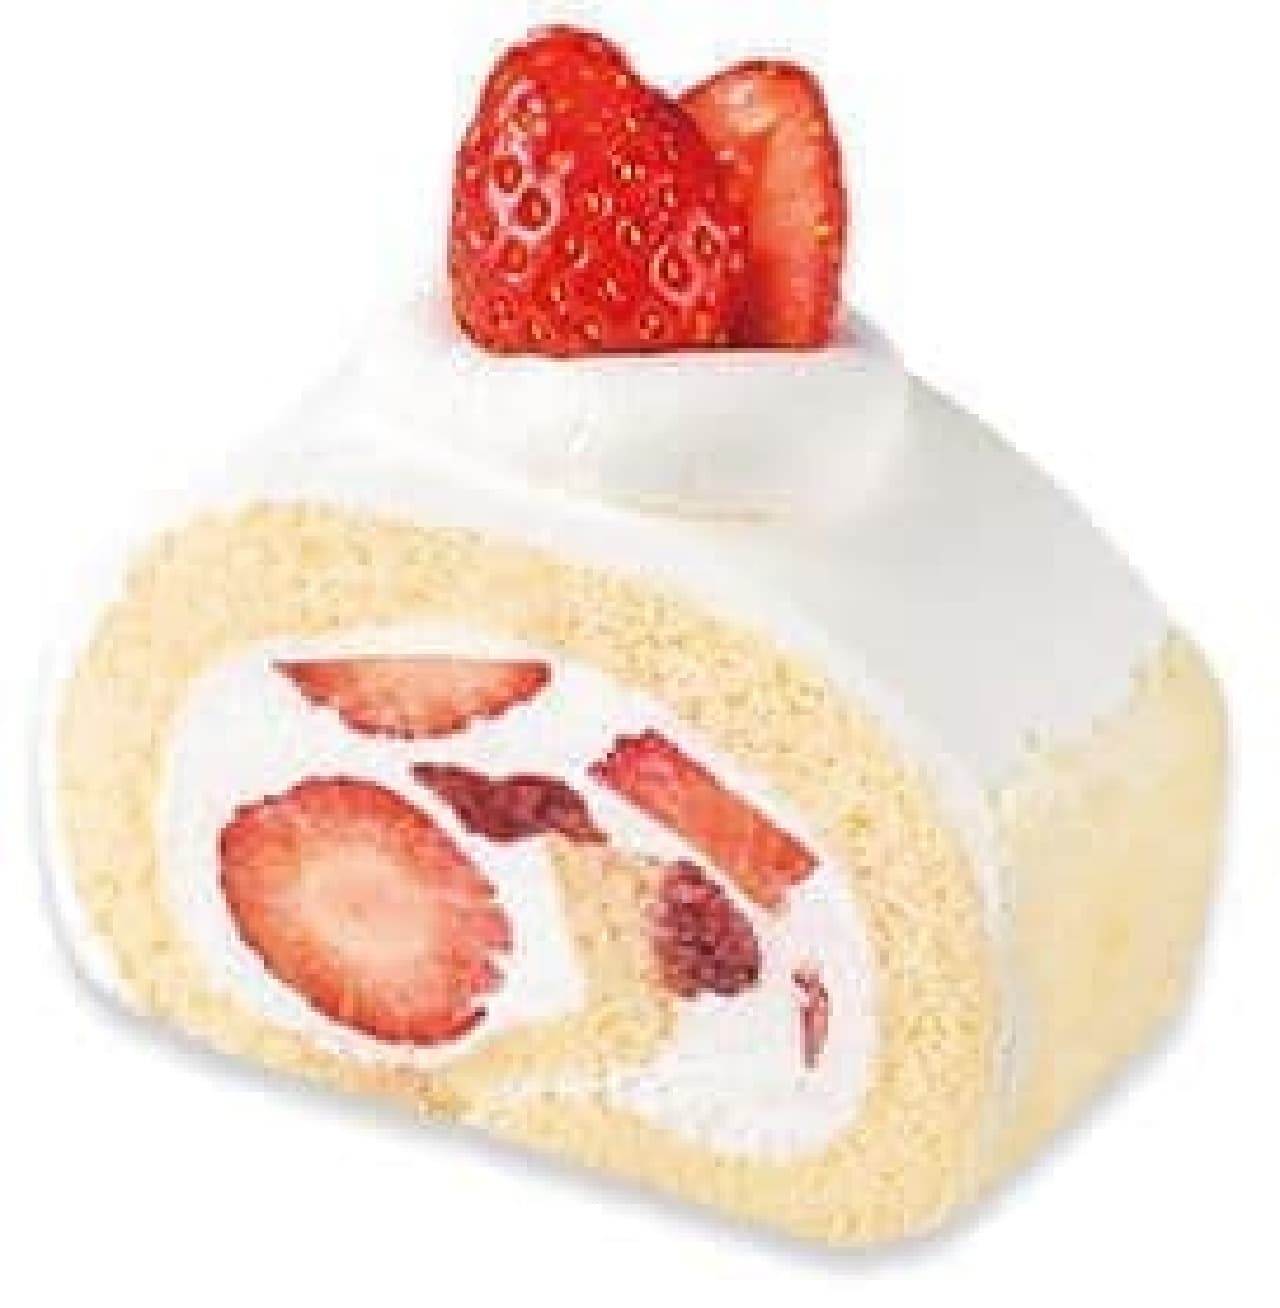 Fujiya pastry shop "Spring colorful strawberry roll cake"